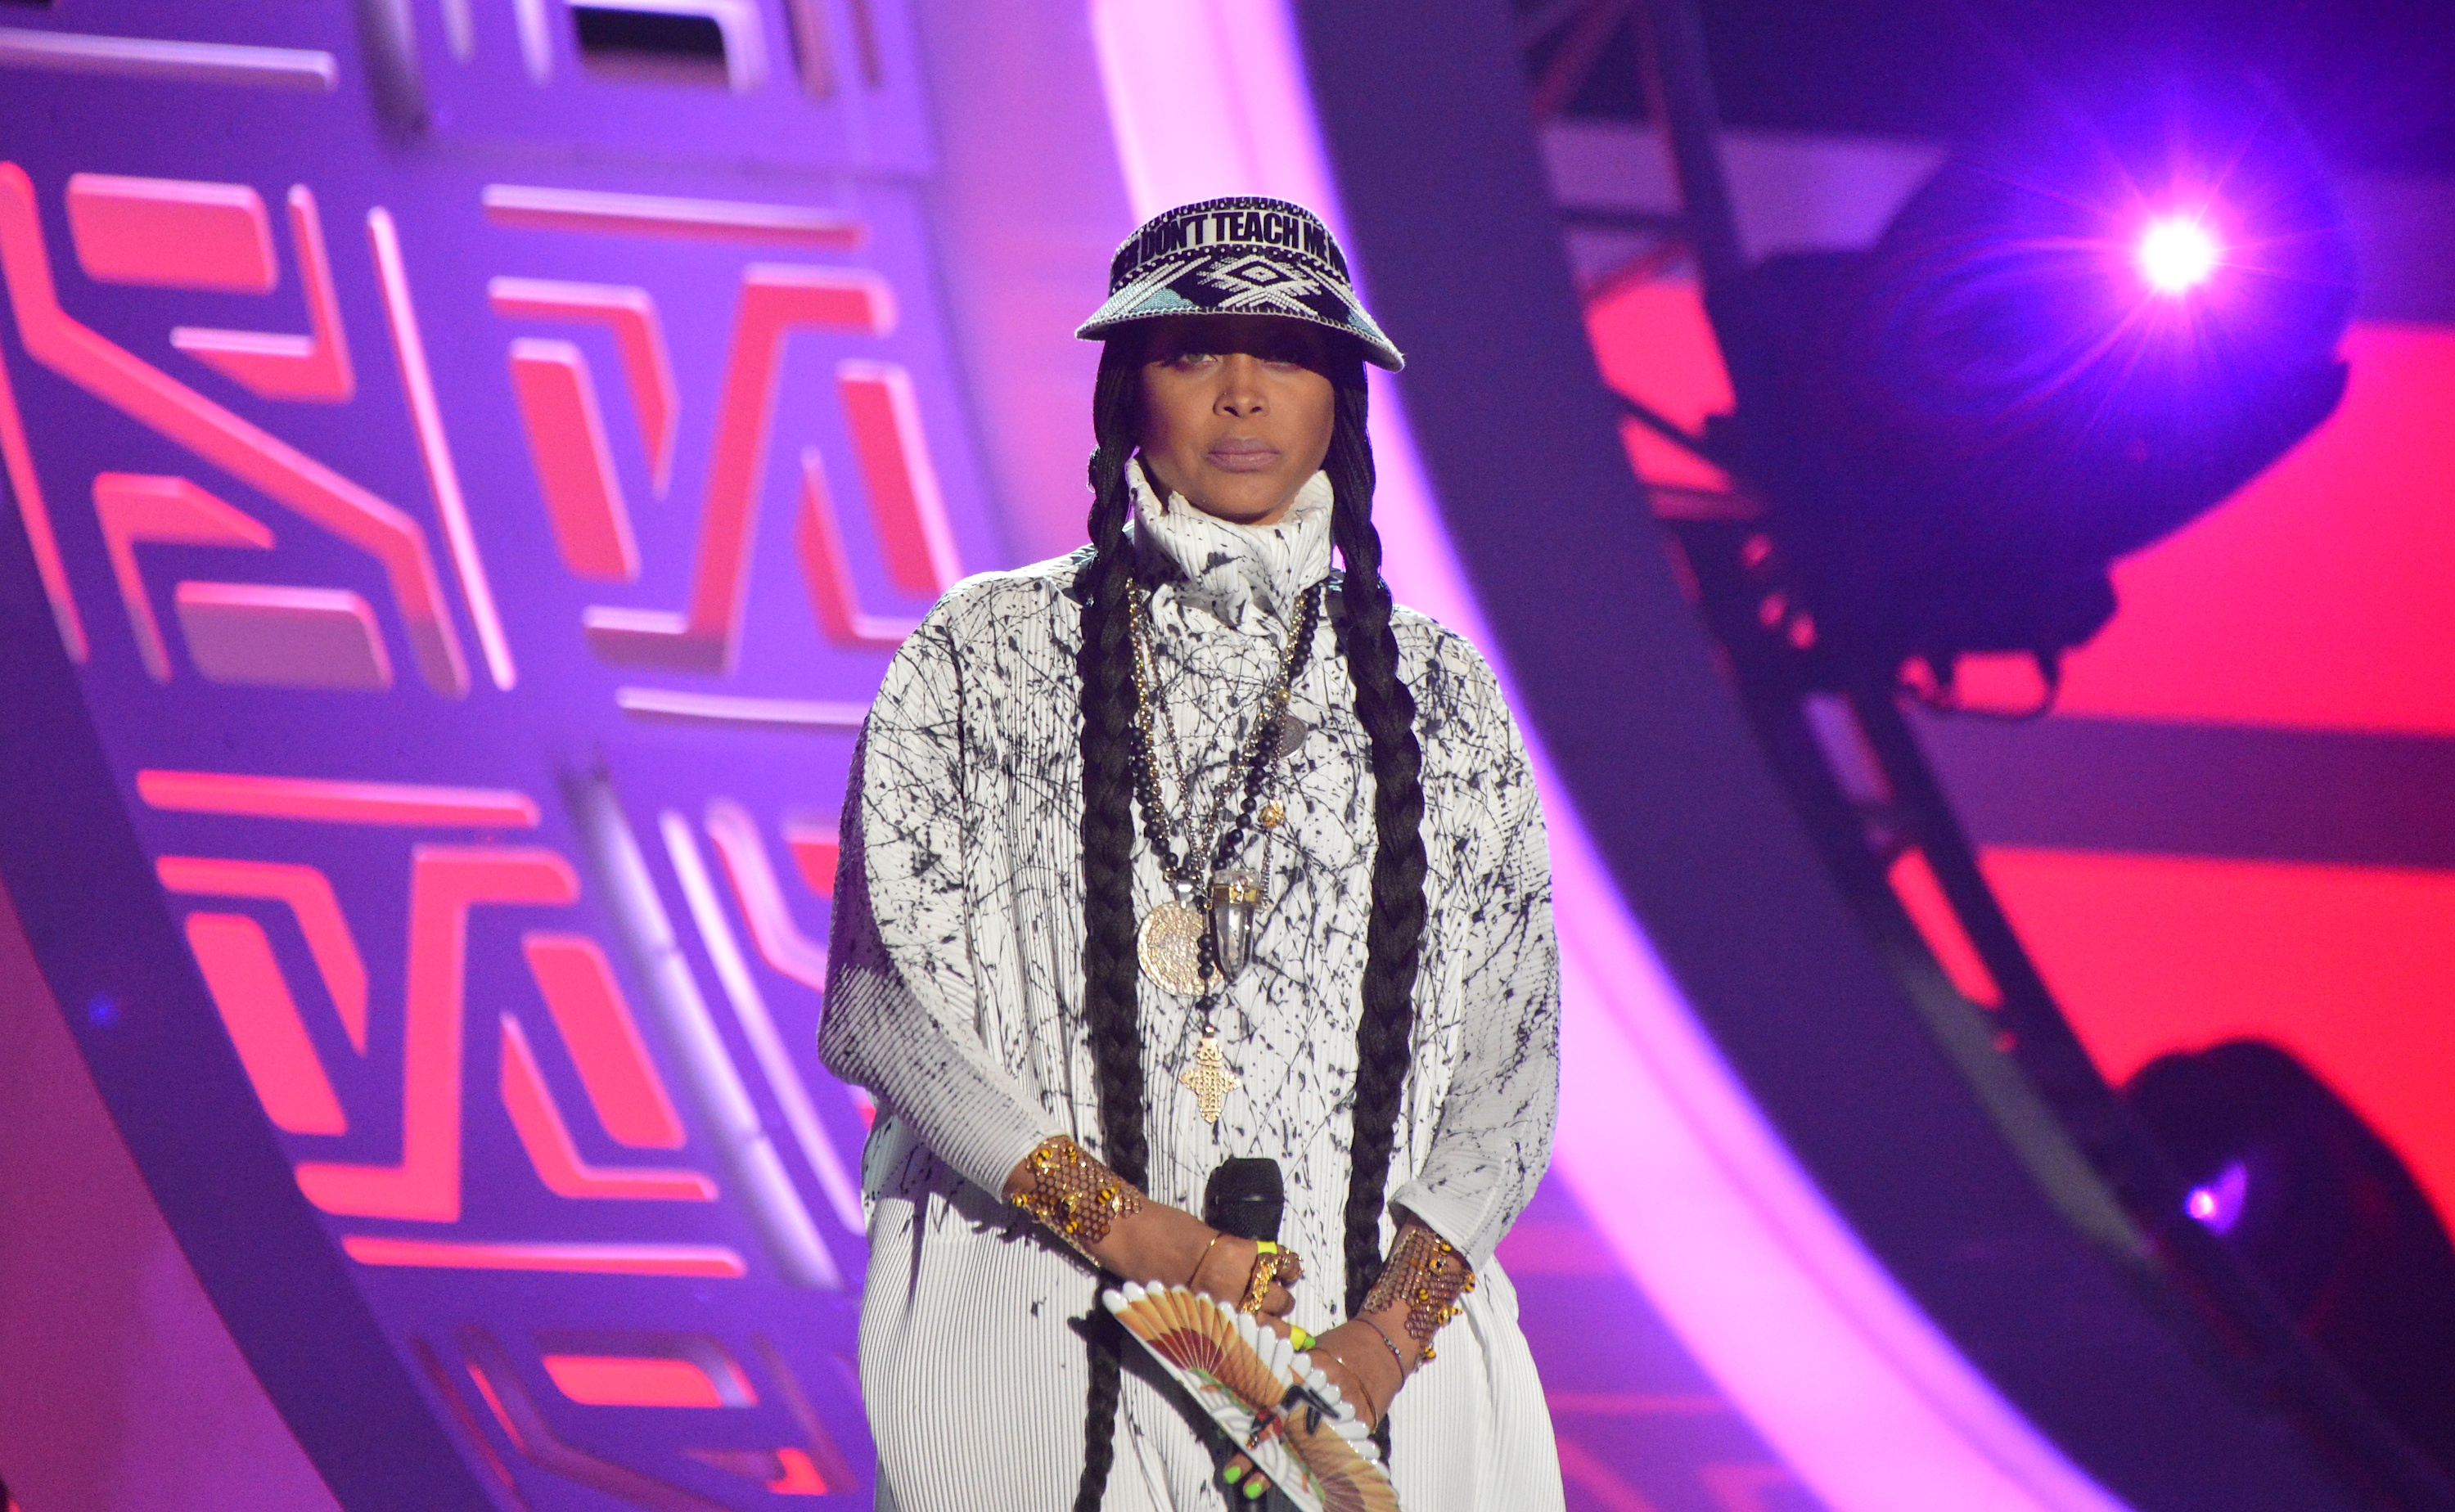 LAS VEGAS, NV - NOVEMBER 06:  Host Erykah Badu speaks onstage during the 2016 Soul Train Music Awards at the Orleans Arena on November 6, 2016 in Las Vegas, Nevada.  (Photo by Mindy Small/FilmMagic) (Mindy Small—FilmMagic)